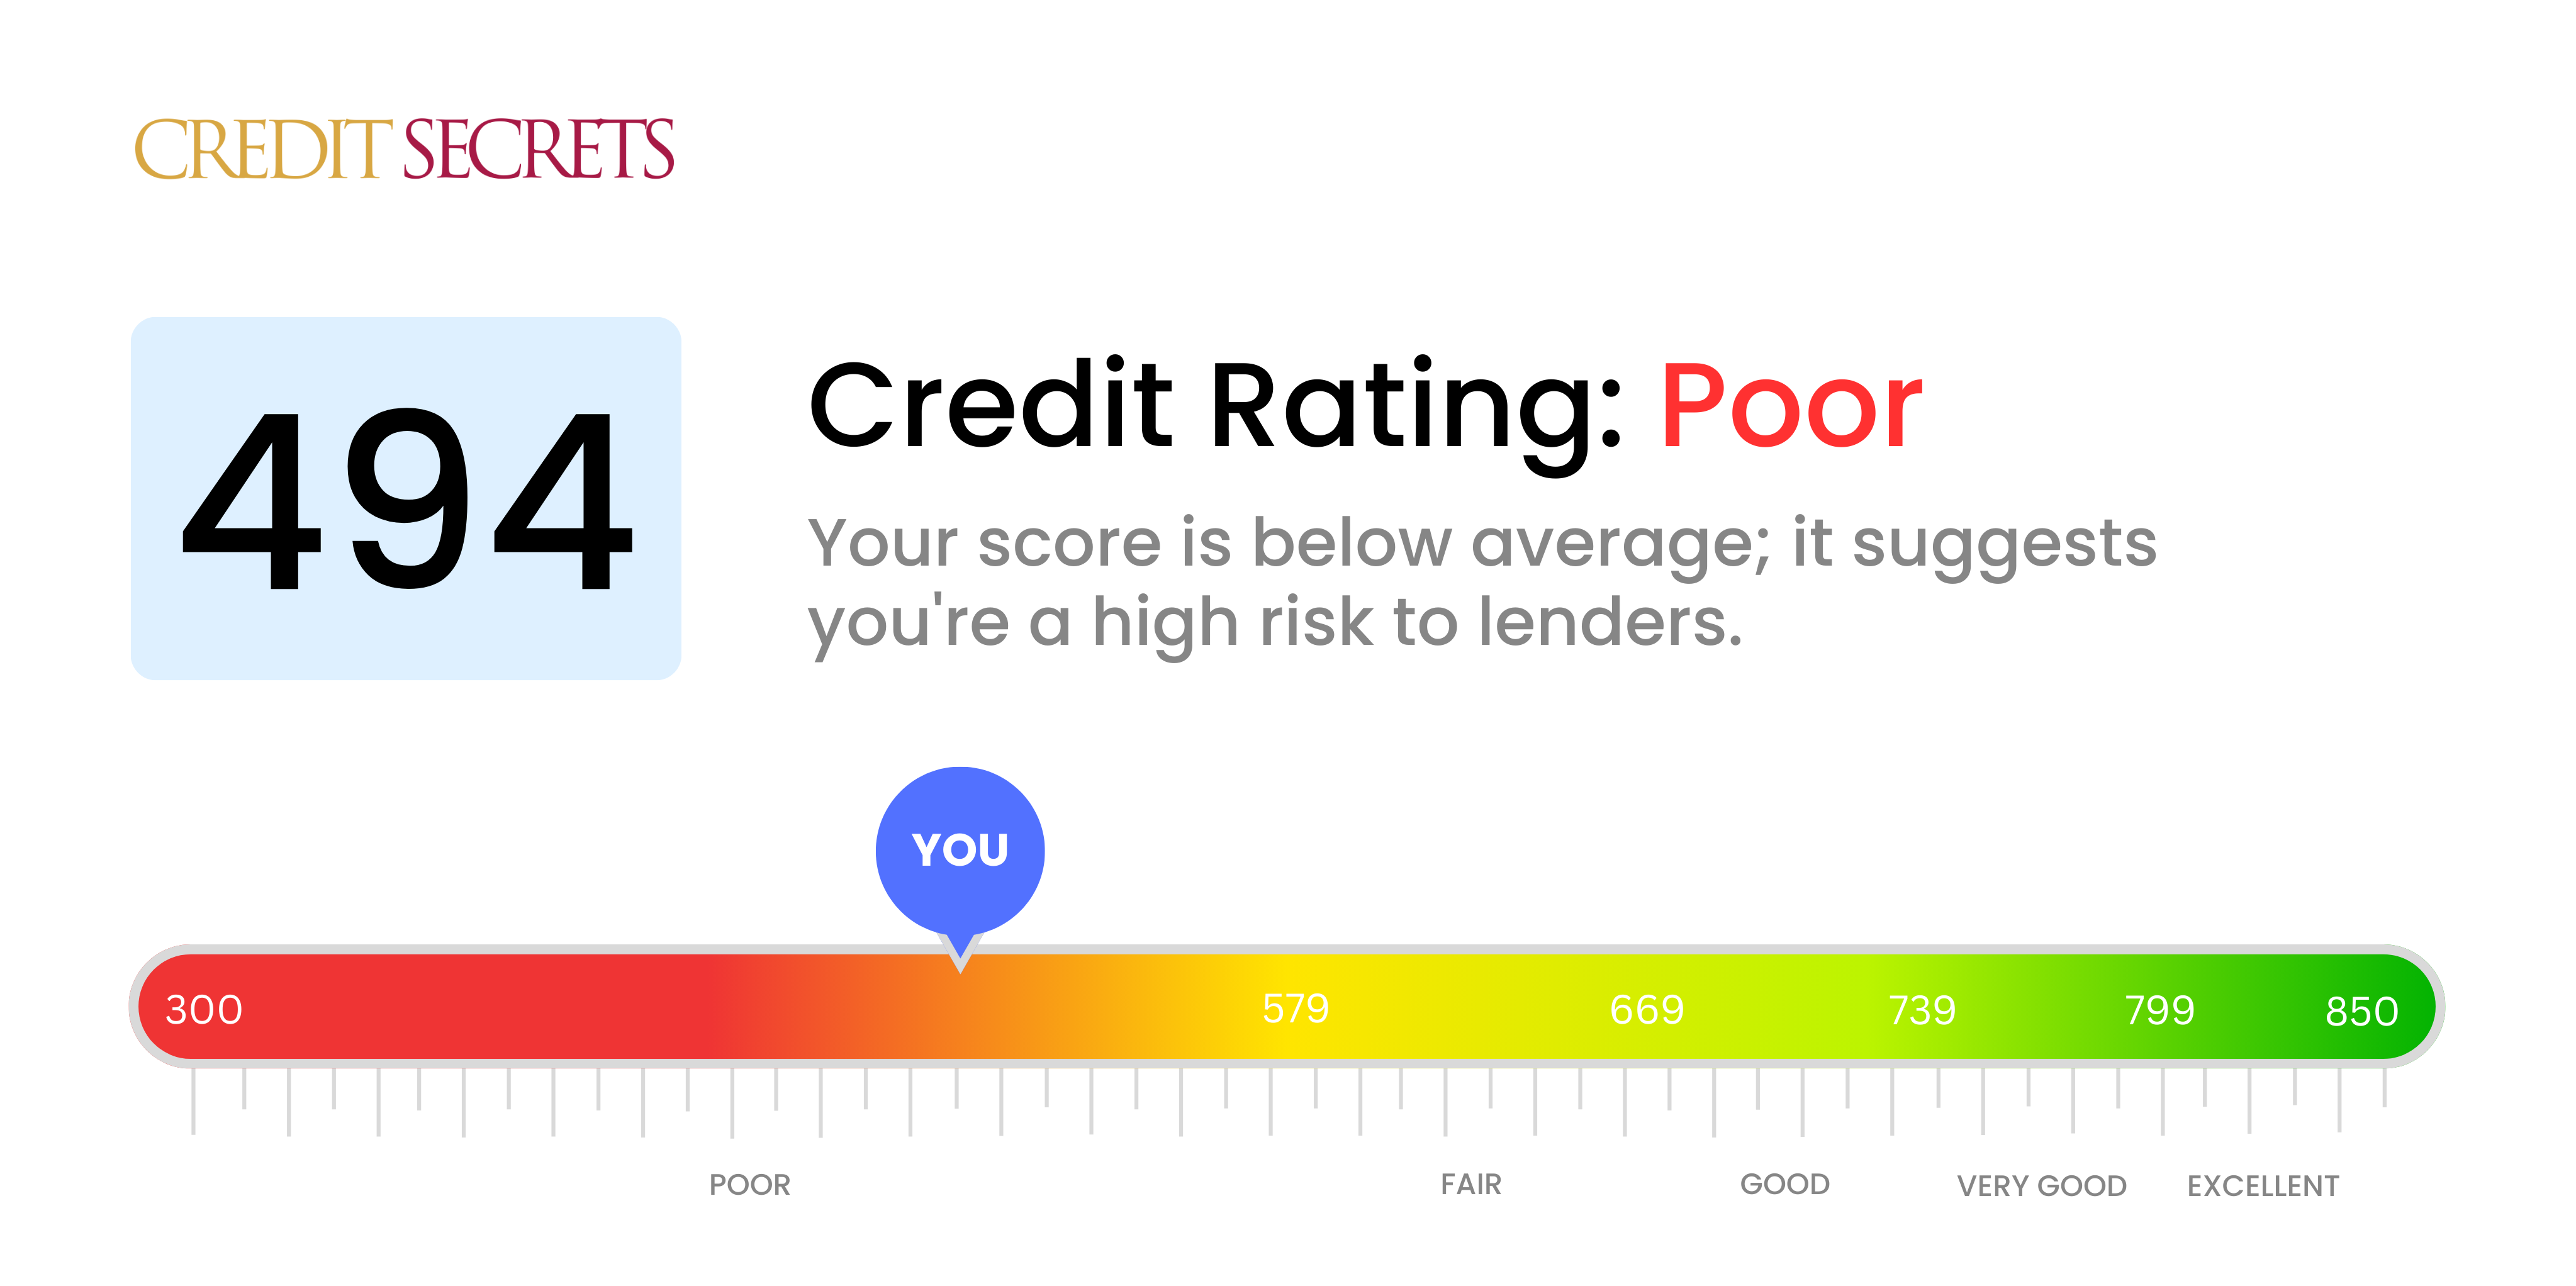 Is 494 a good credit score?